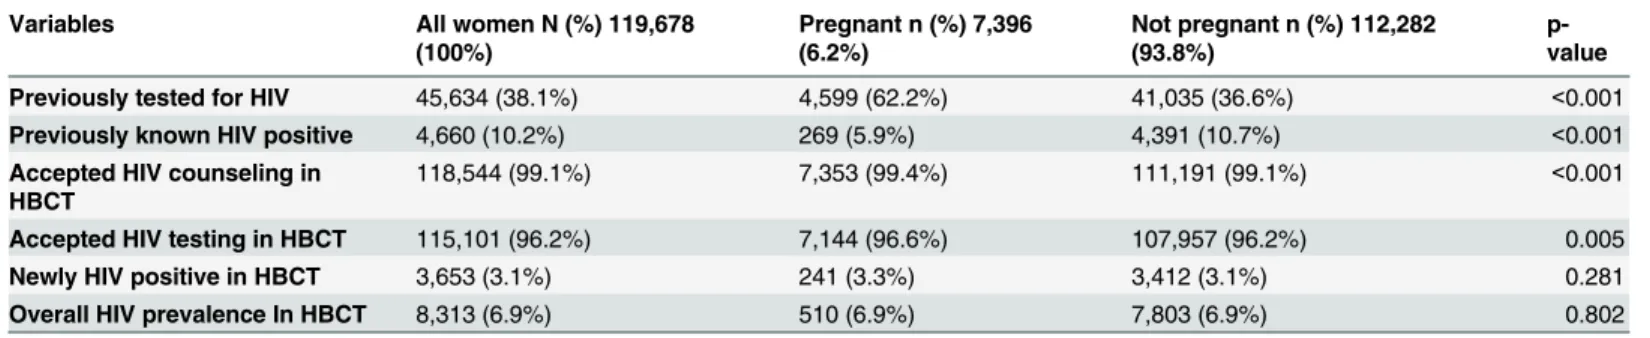 Table 2. Testing history, testing uptake, and prevalence by pregnancy status.